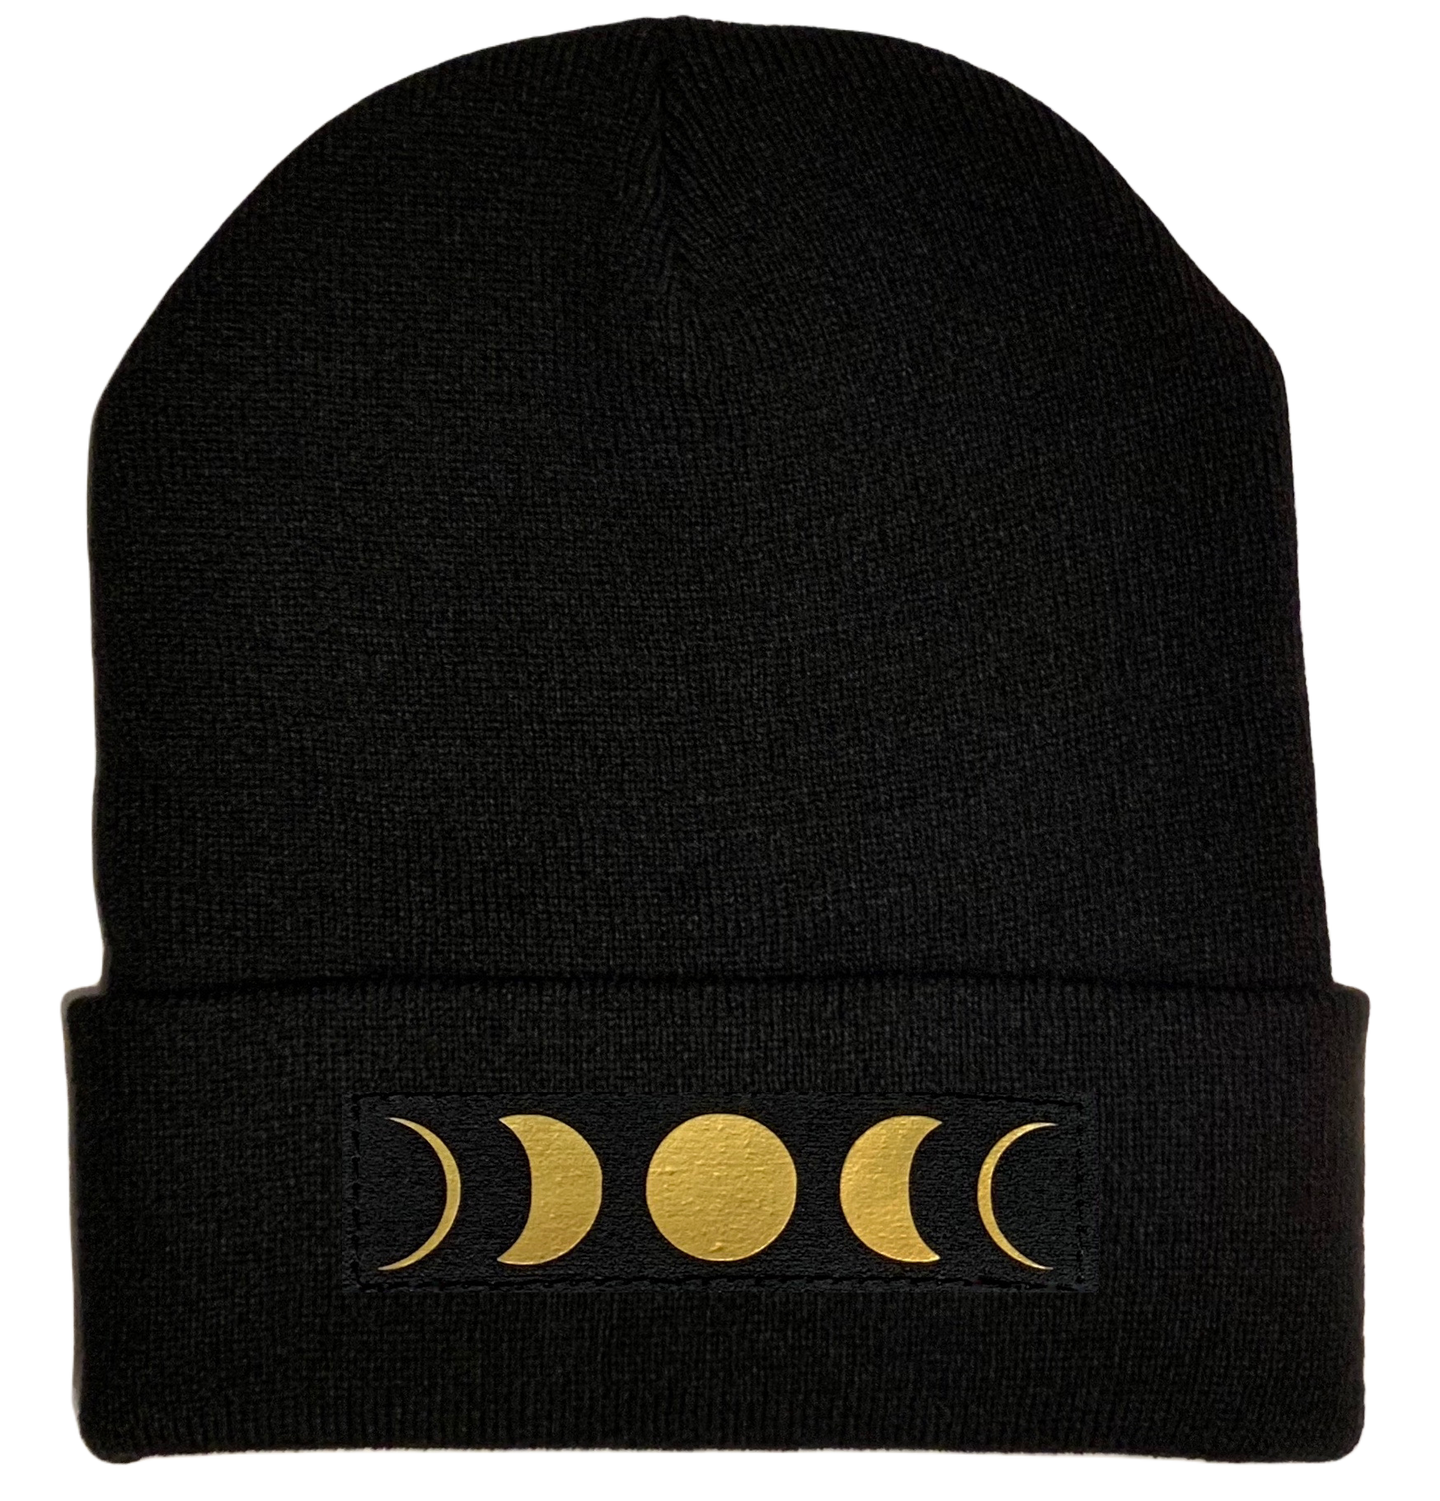 Beanies - Black Cuffed Buddha Beanie with Handmade Black and Gold Moon Phase patch over your Third Eye